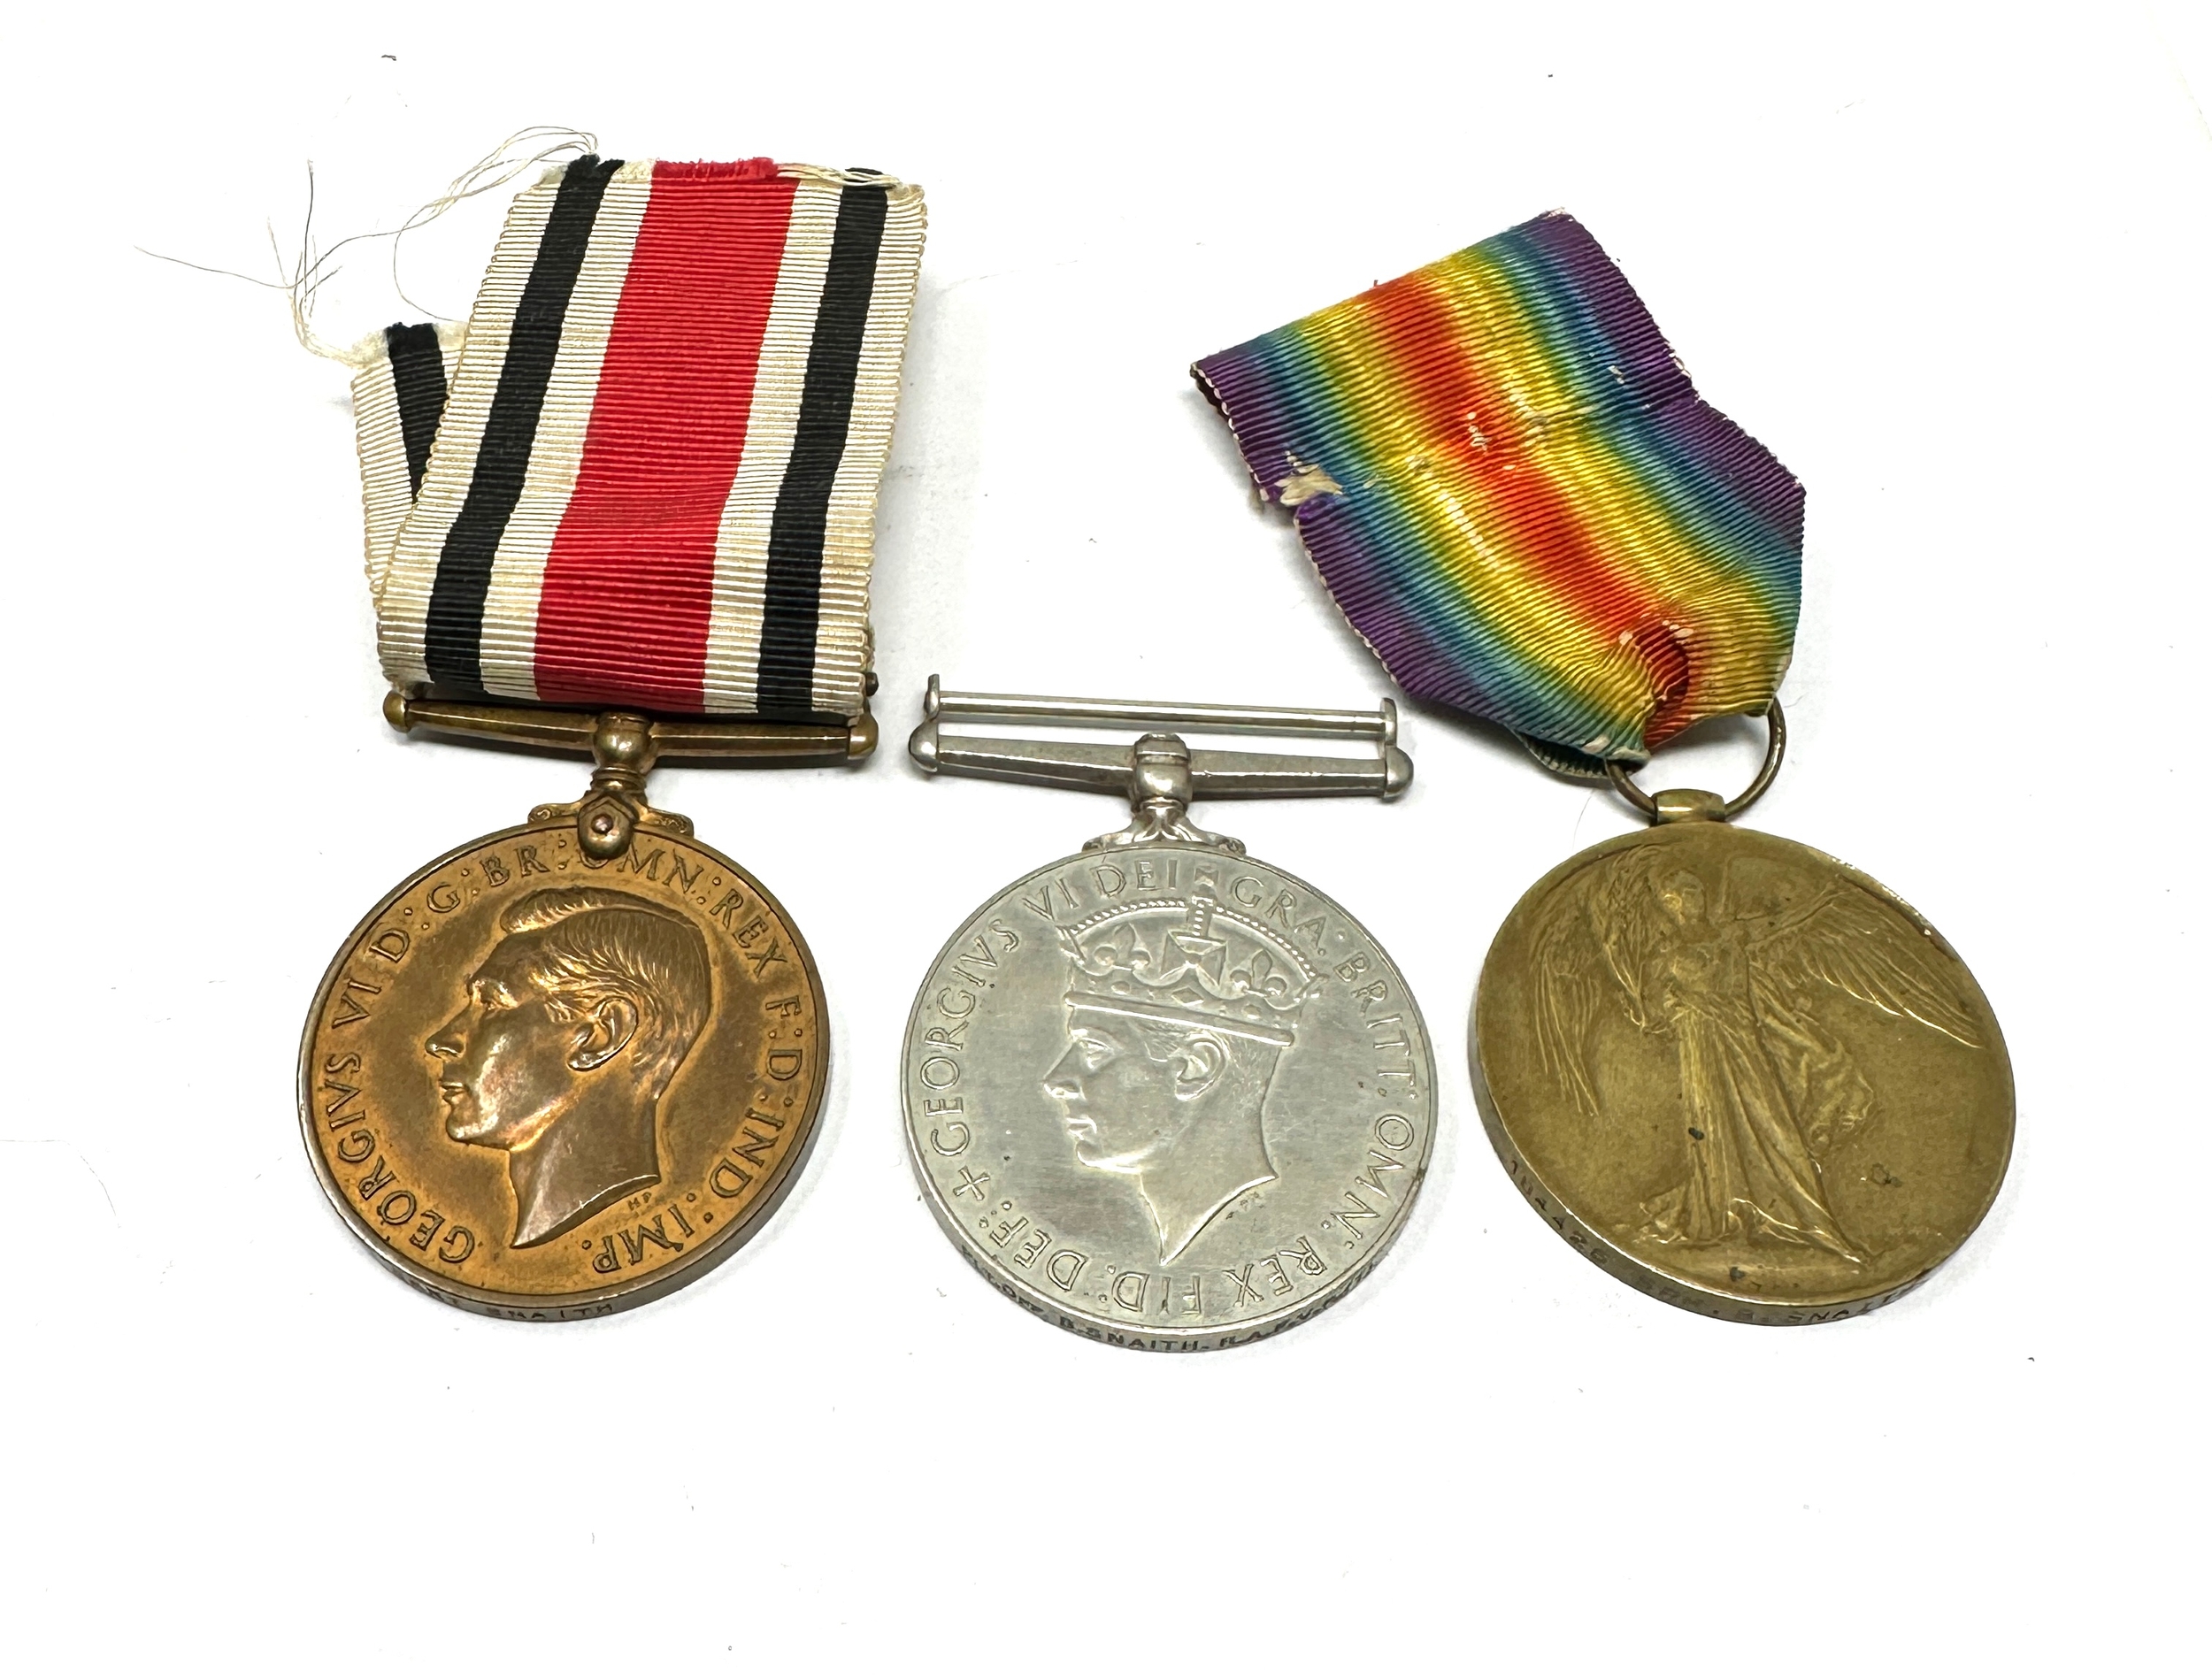 3 ww1 medals inc victory to 184425 spr b snaith r.e GV.1 special constable to b snaith and b.